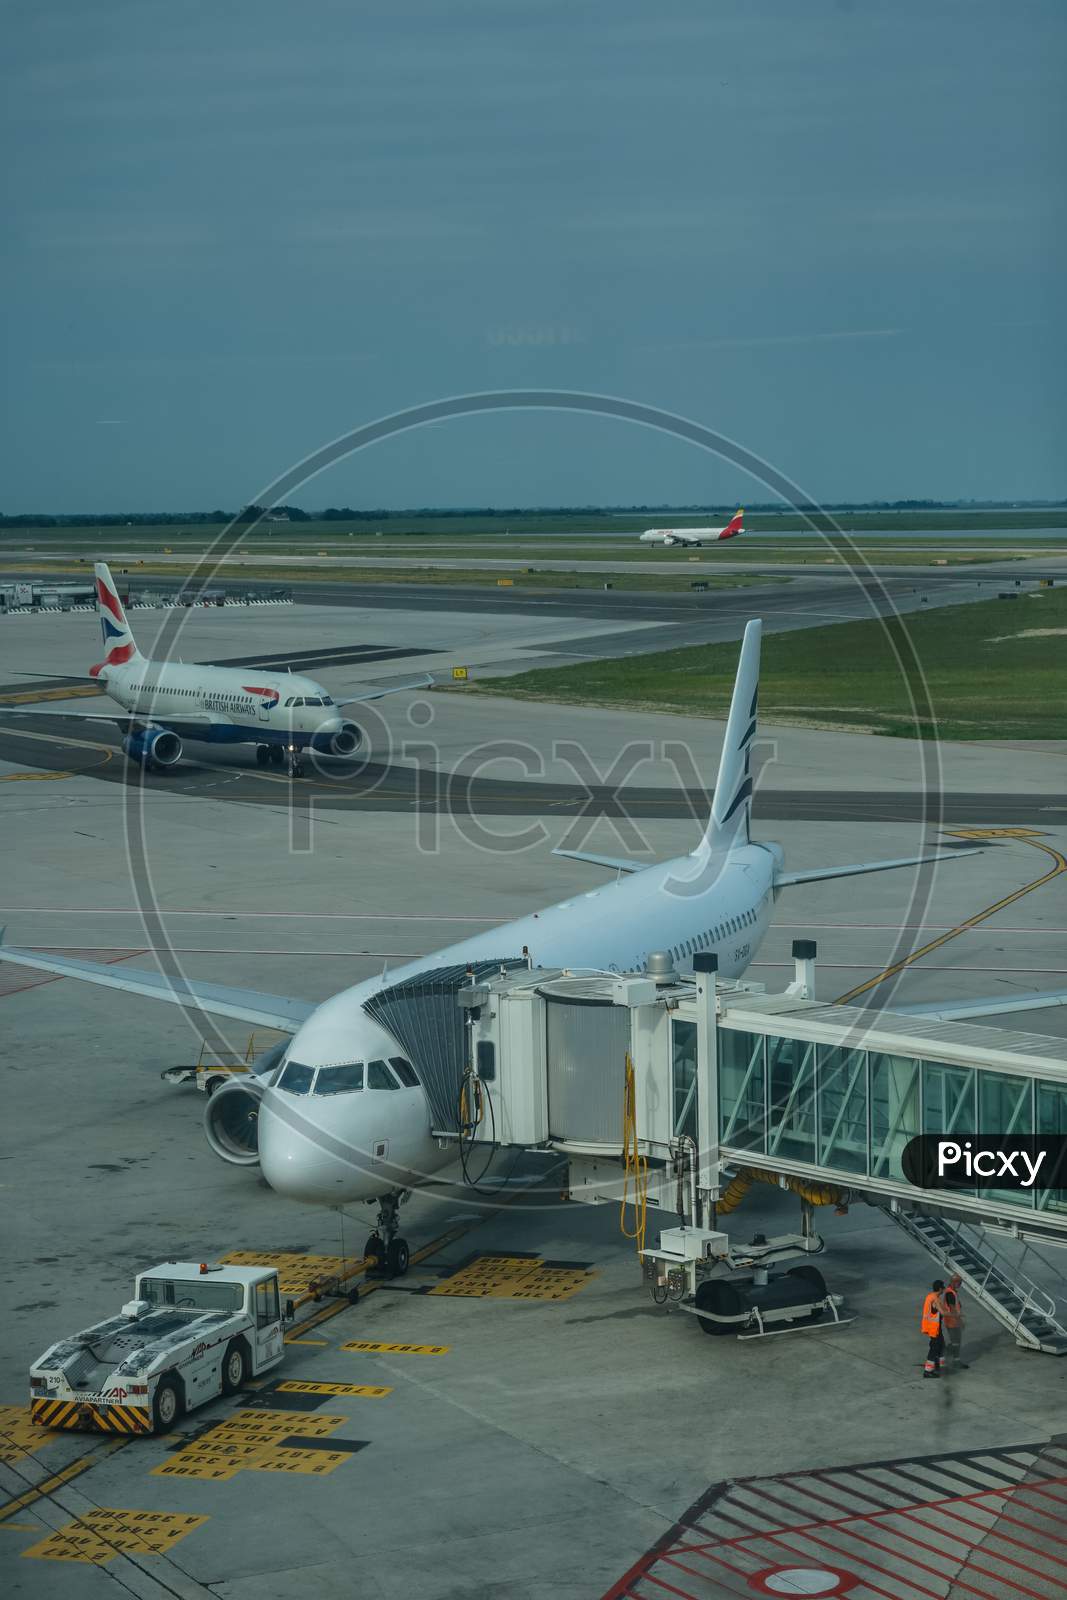 Venice, Italy - 01 July 2018: British Airways Flight At Marco Polo Airport In Venice, Italy